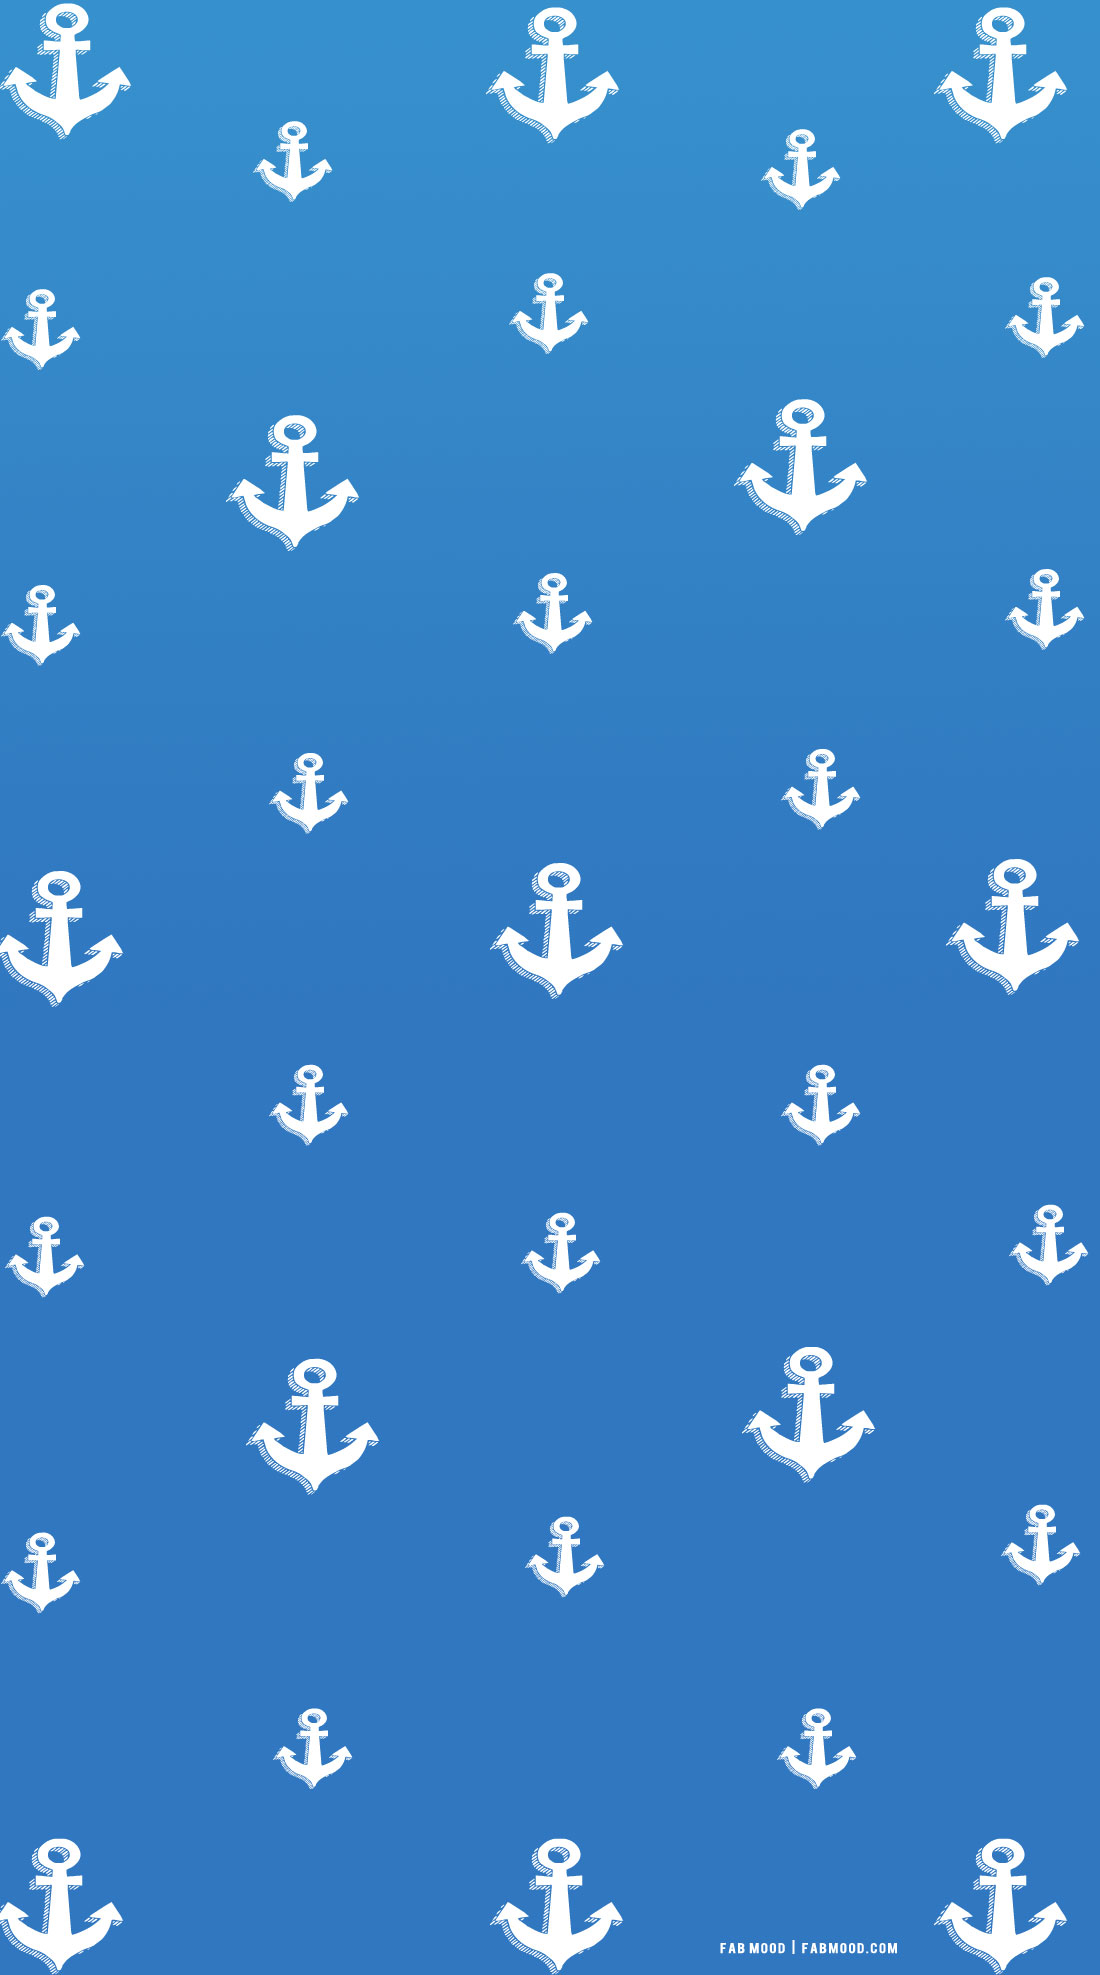 ahoy there mateys, nautical background, anchor wallpaper iphone, ahoy there background